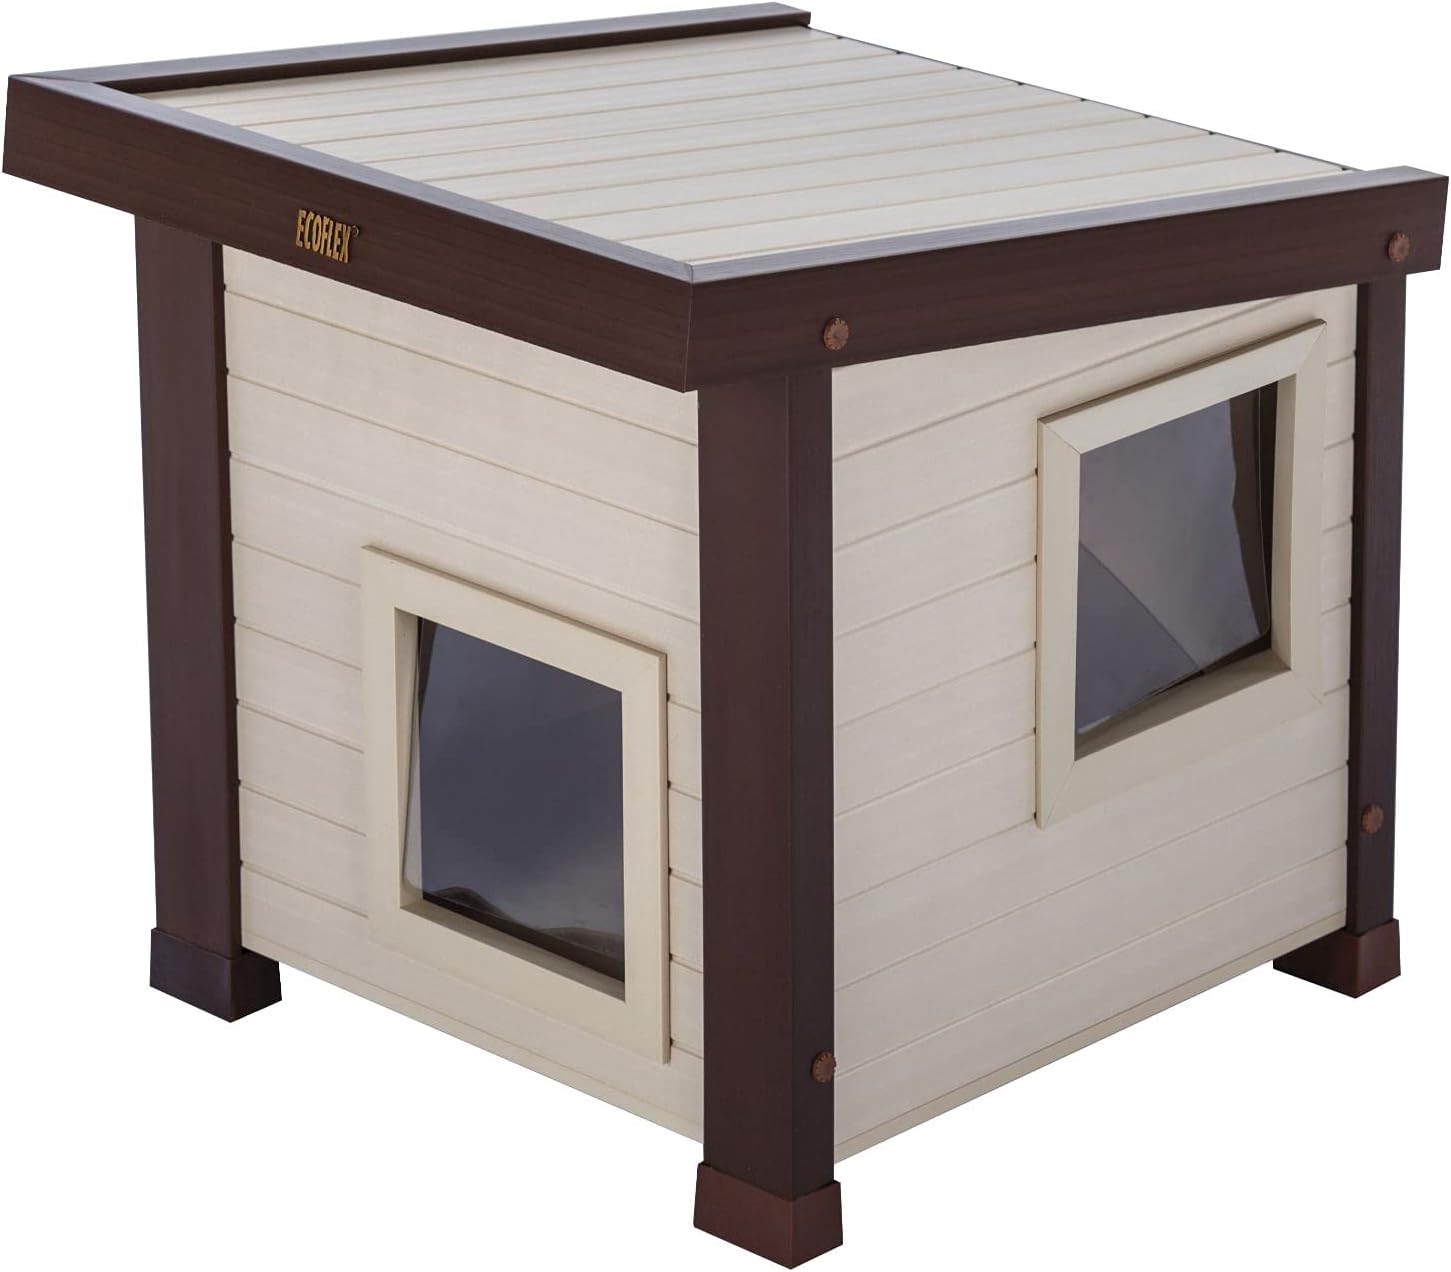 New Age Pet ecoFLEX Albany Outdoor Feral Cat House $45.6 at Amazon